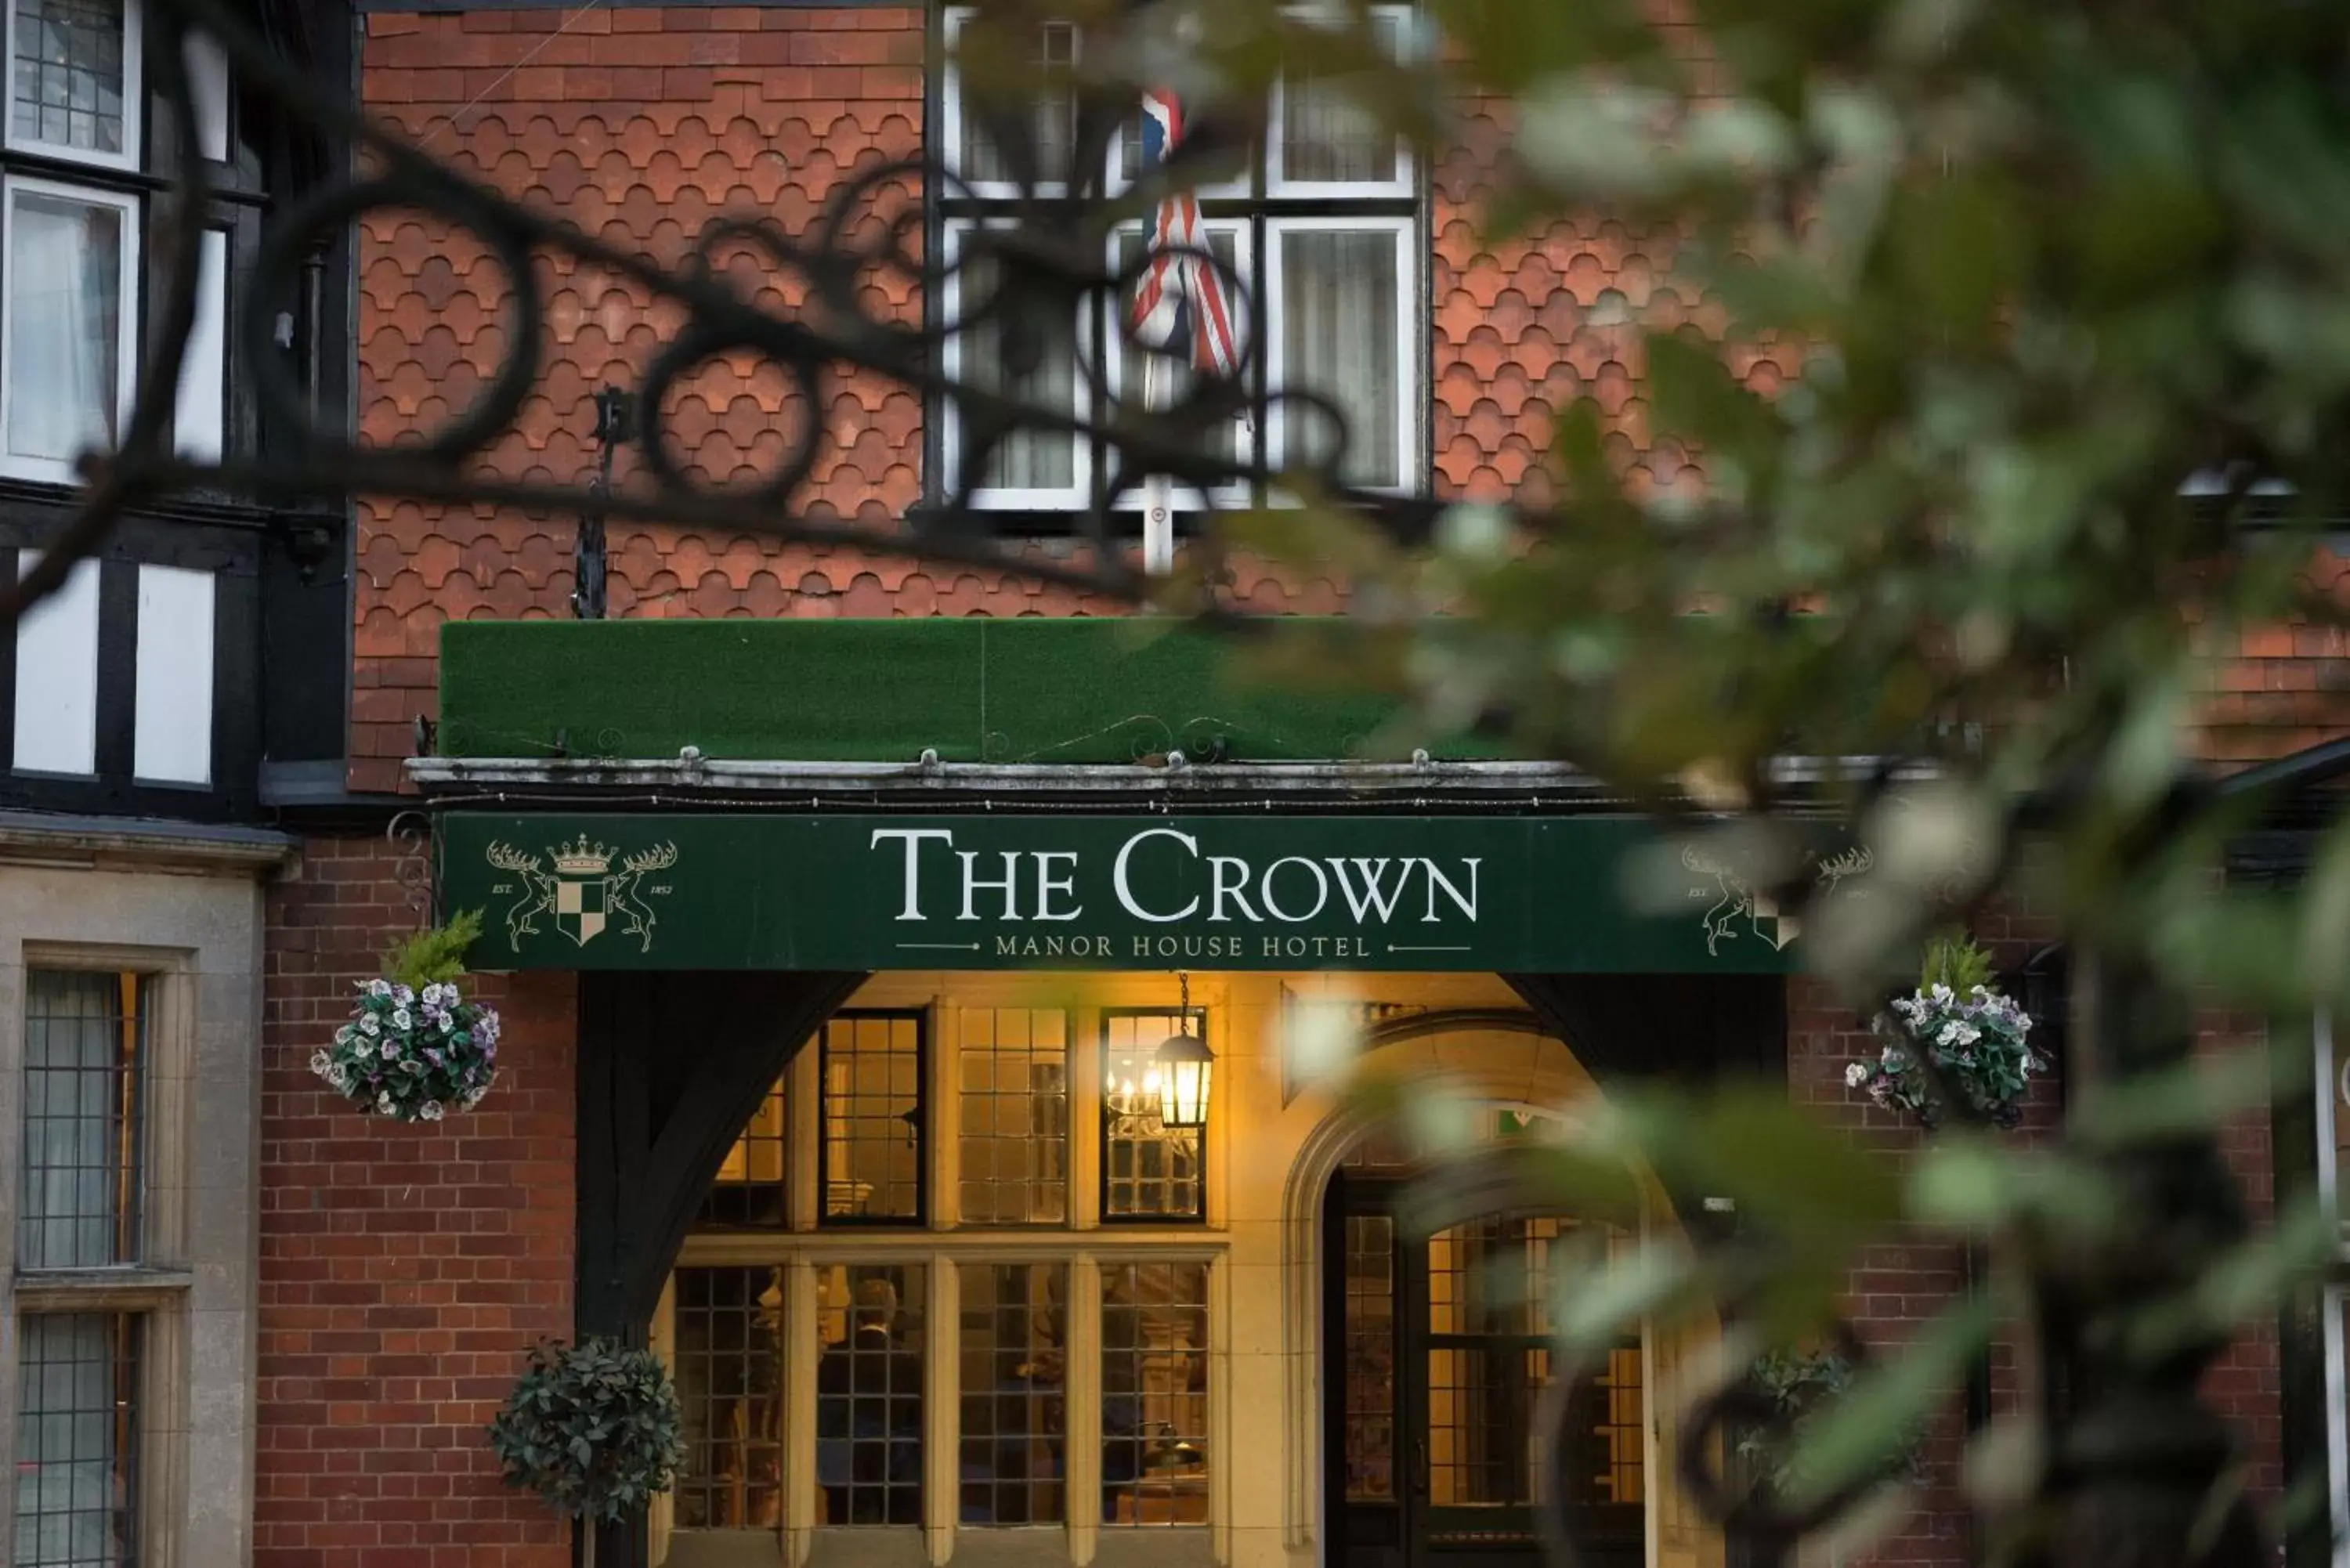 Facade/entrance in The Crown Manor House Hotel